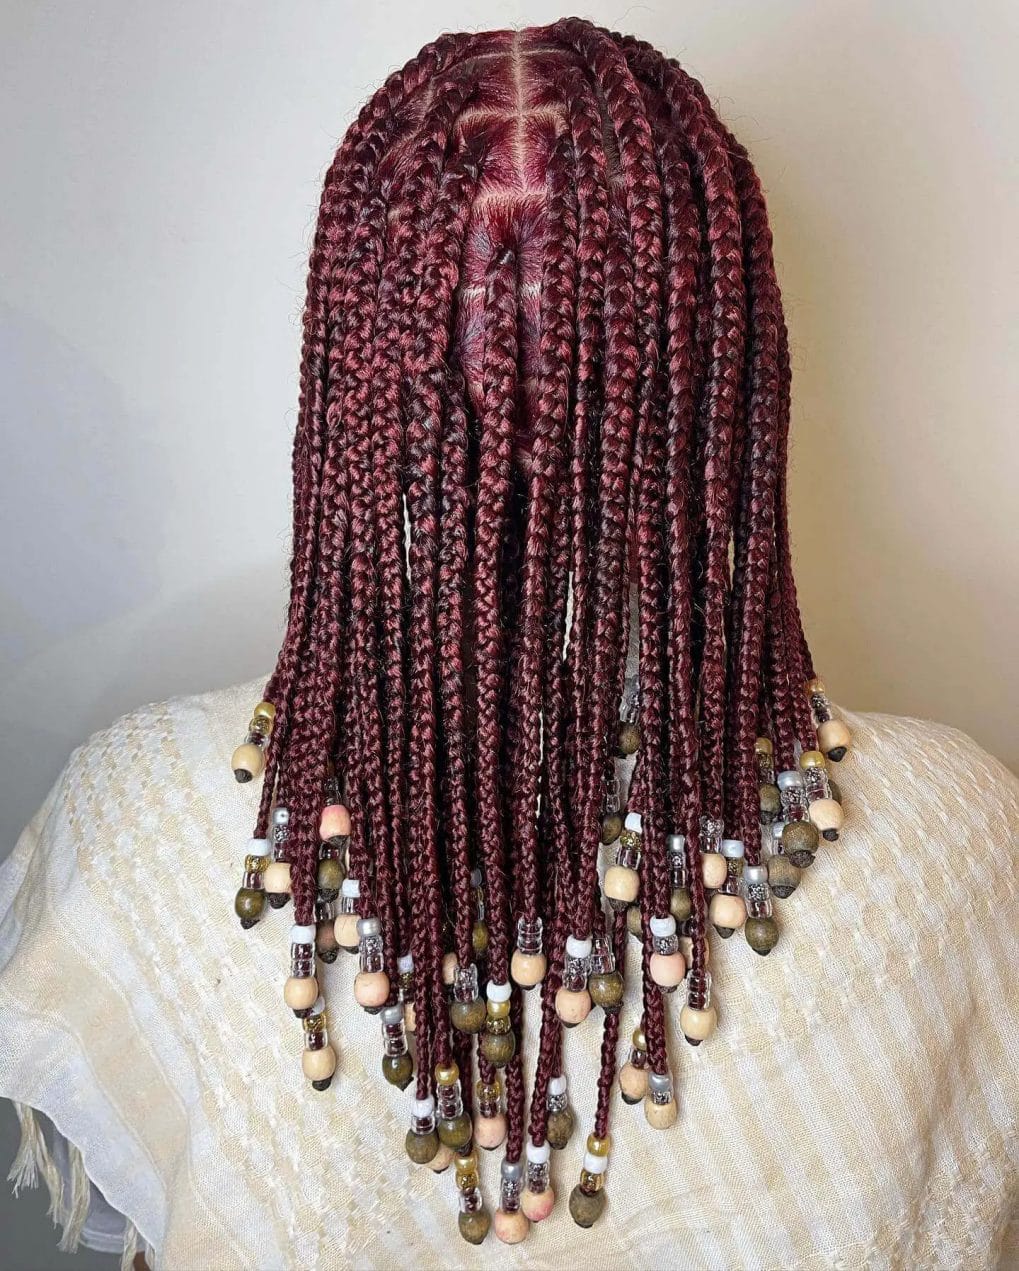 Sleek burgundy braids with muted earth tone beads in varying shapes.